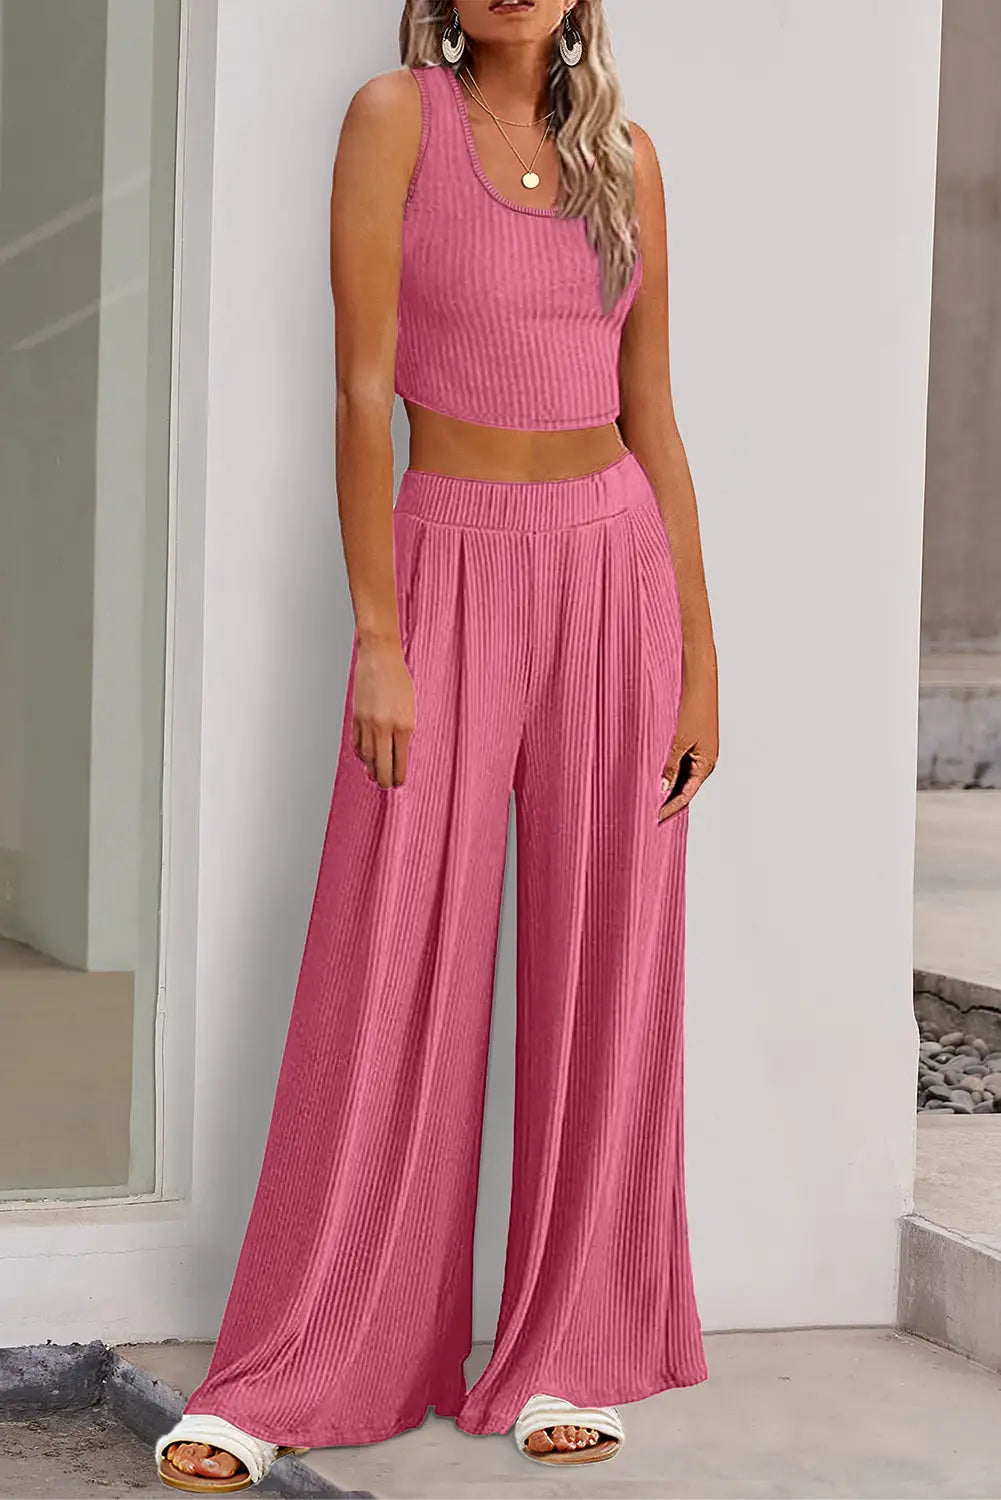 Textured crop top and wide leg pants outfit - pink / s / 93% viscose + 7% elastane - two piece sets/pant sets